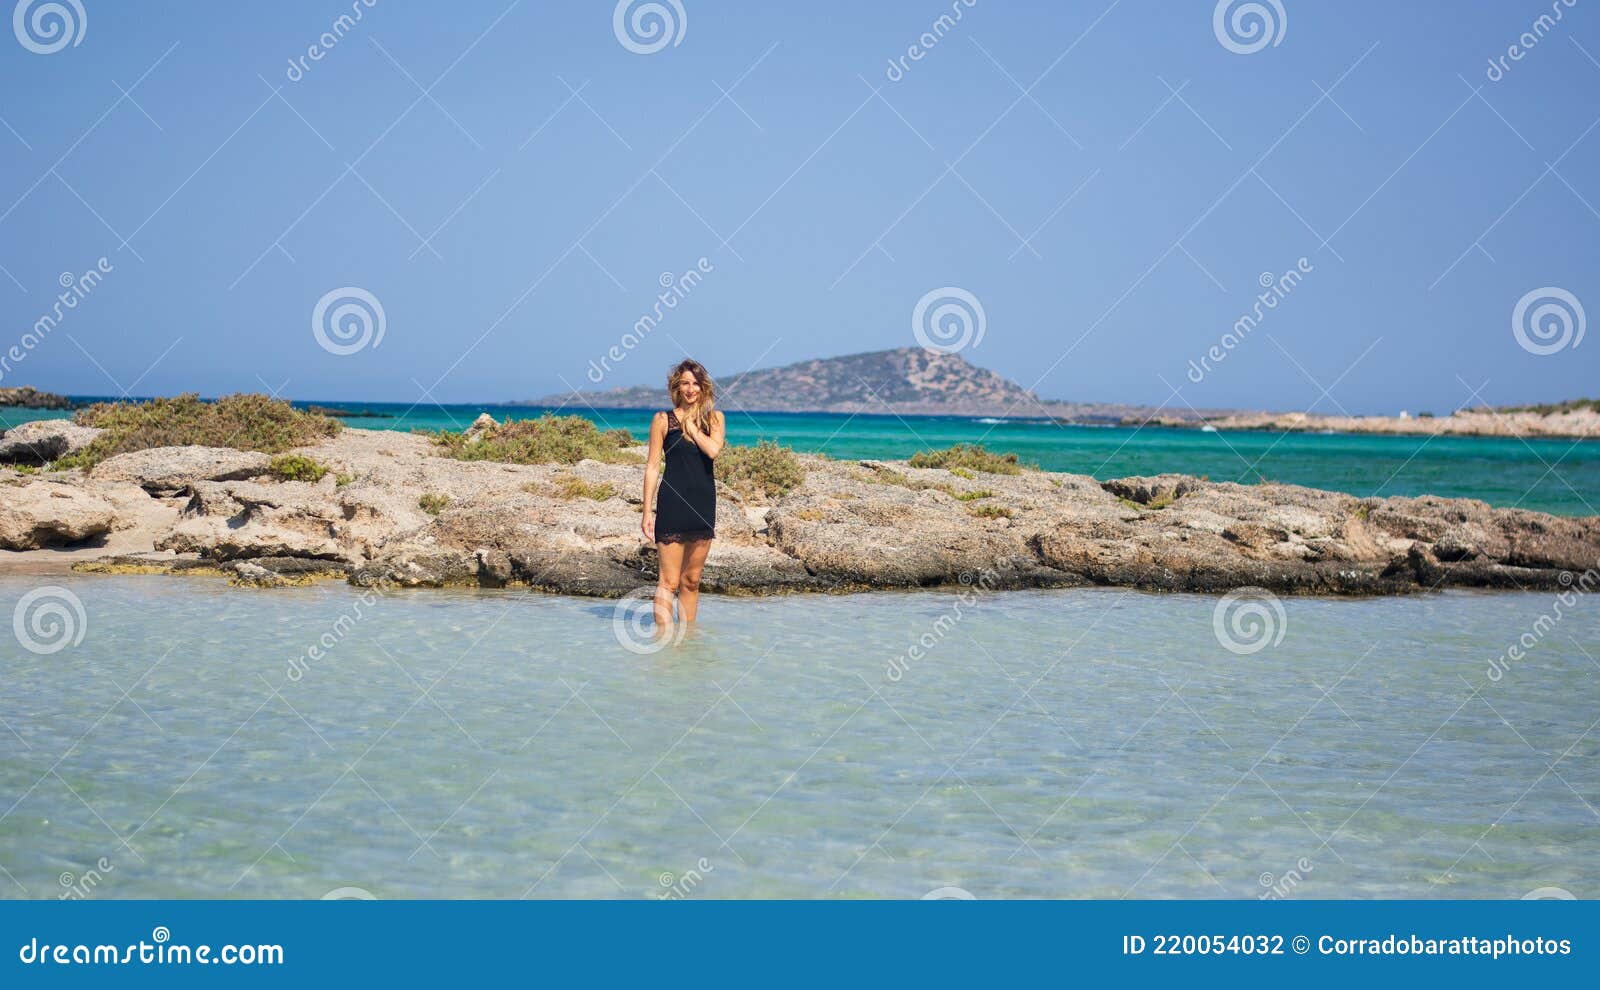 the happy woman at the sea